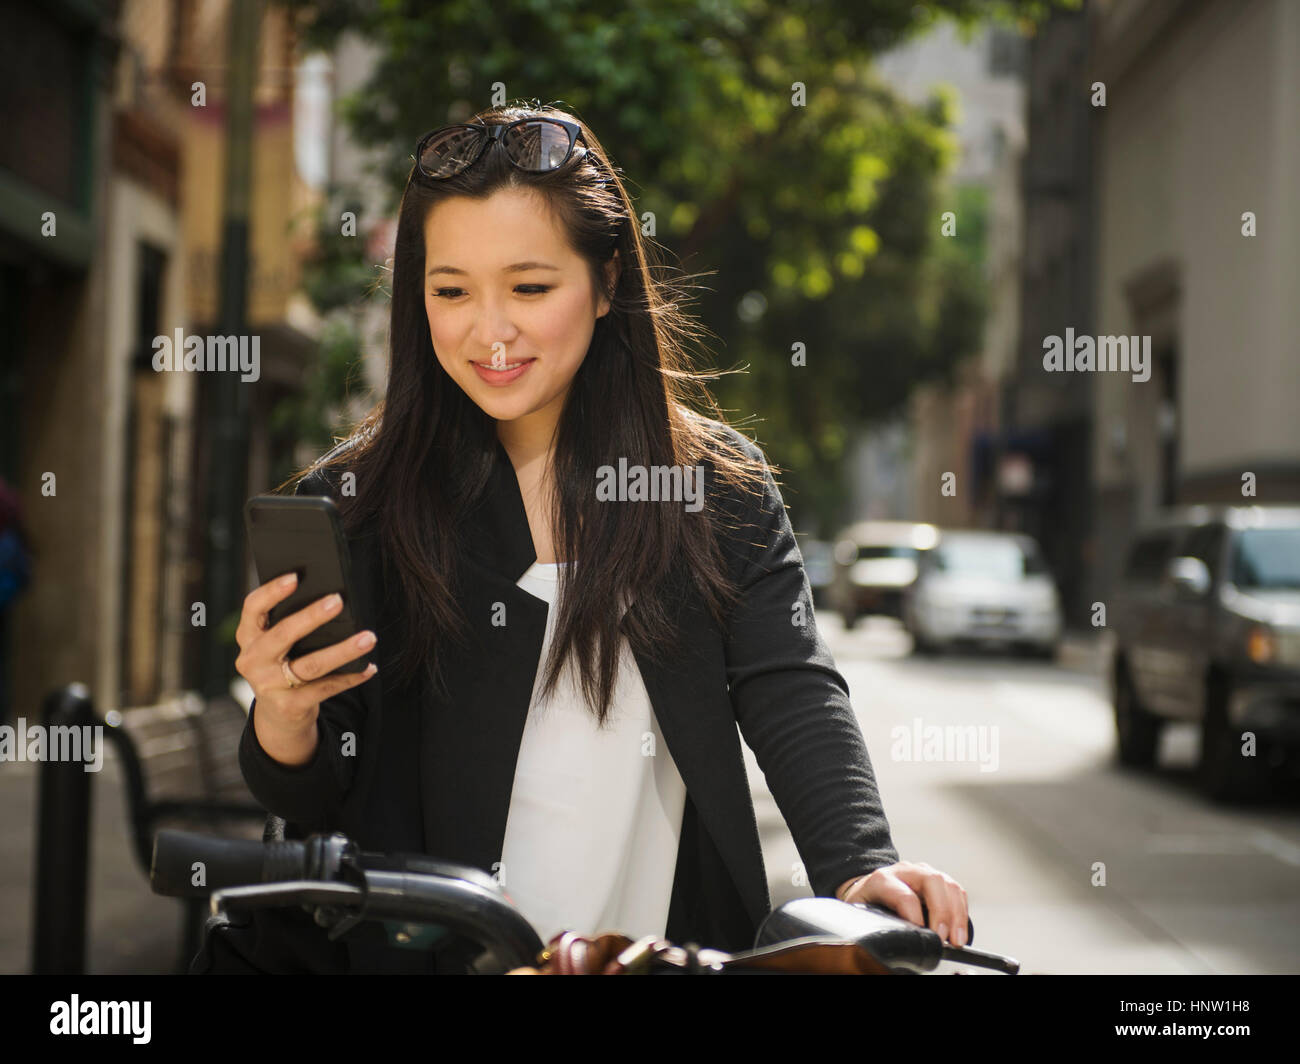 Chinese businesswoman on bicycle texting on cell phone Stock Photo